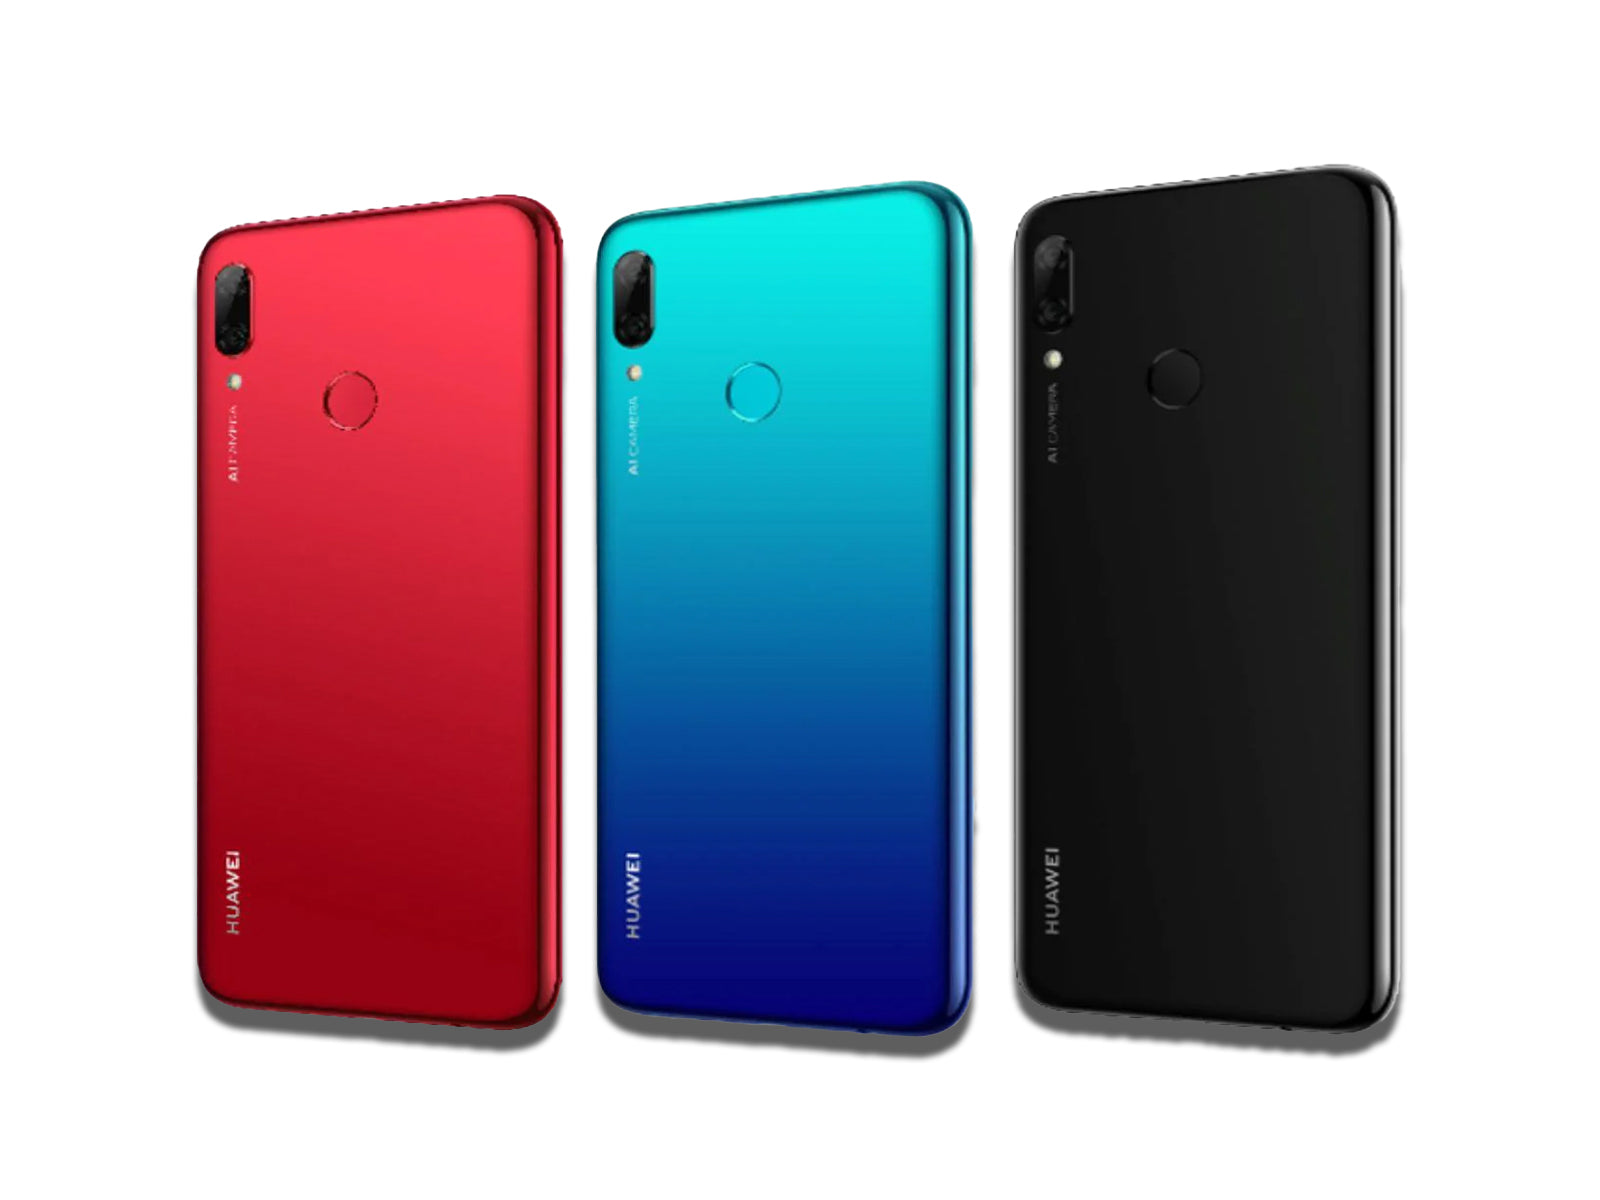 Image Showing Three Different Colours Variants With Back View on The White Background